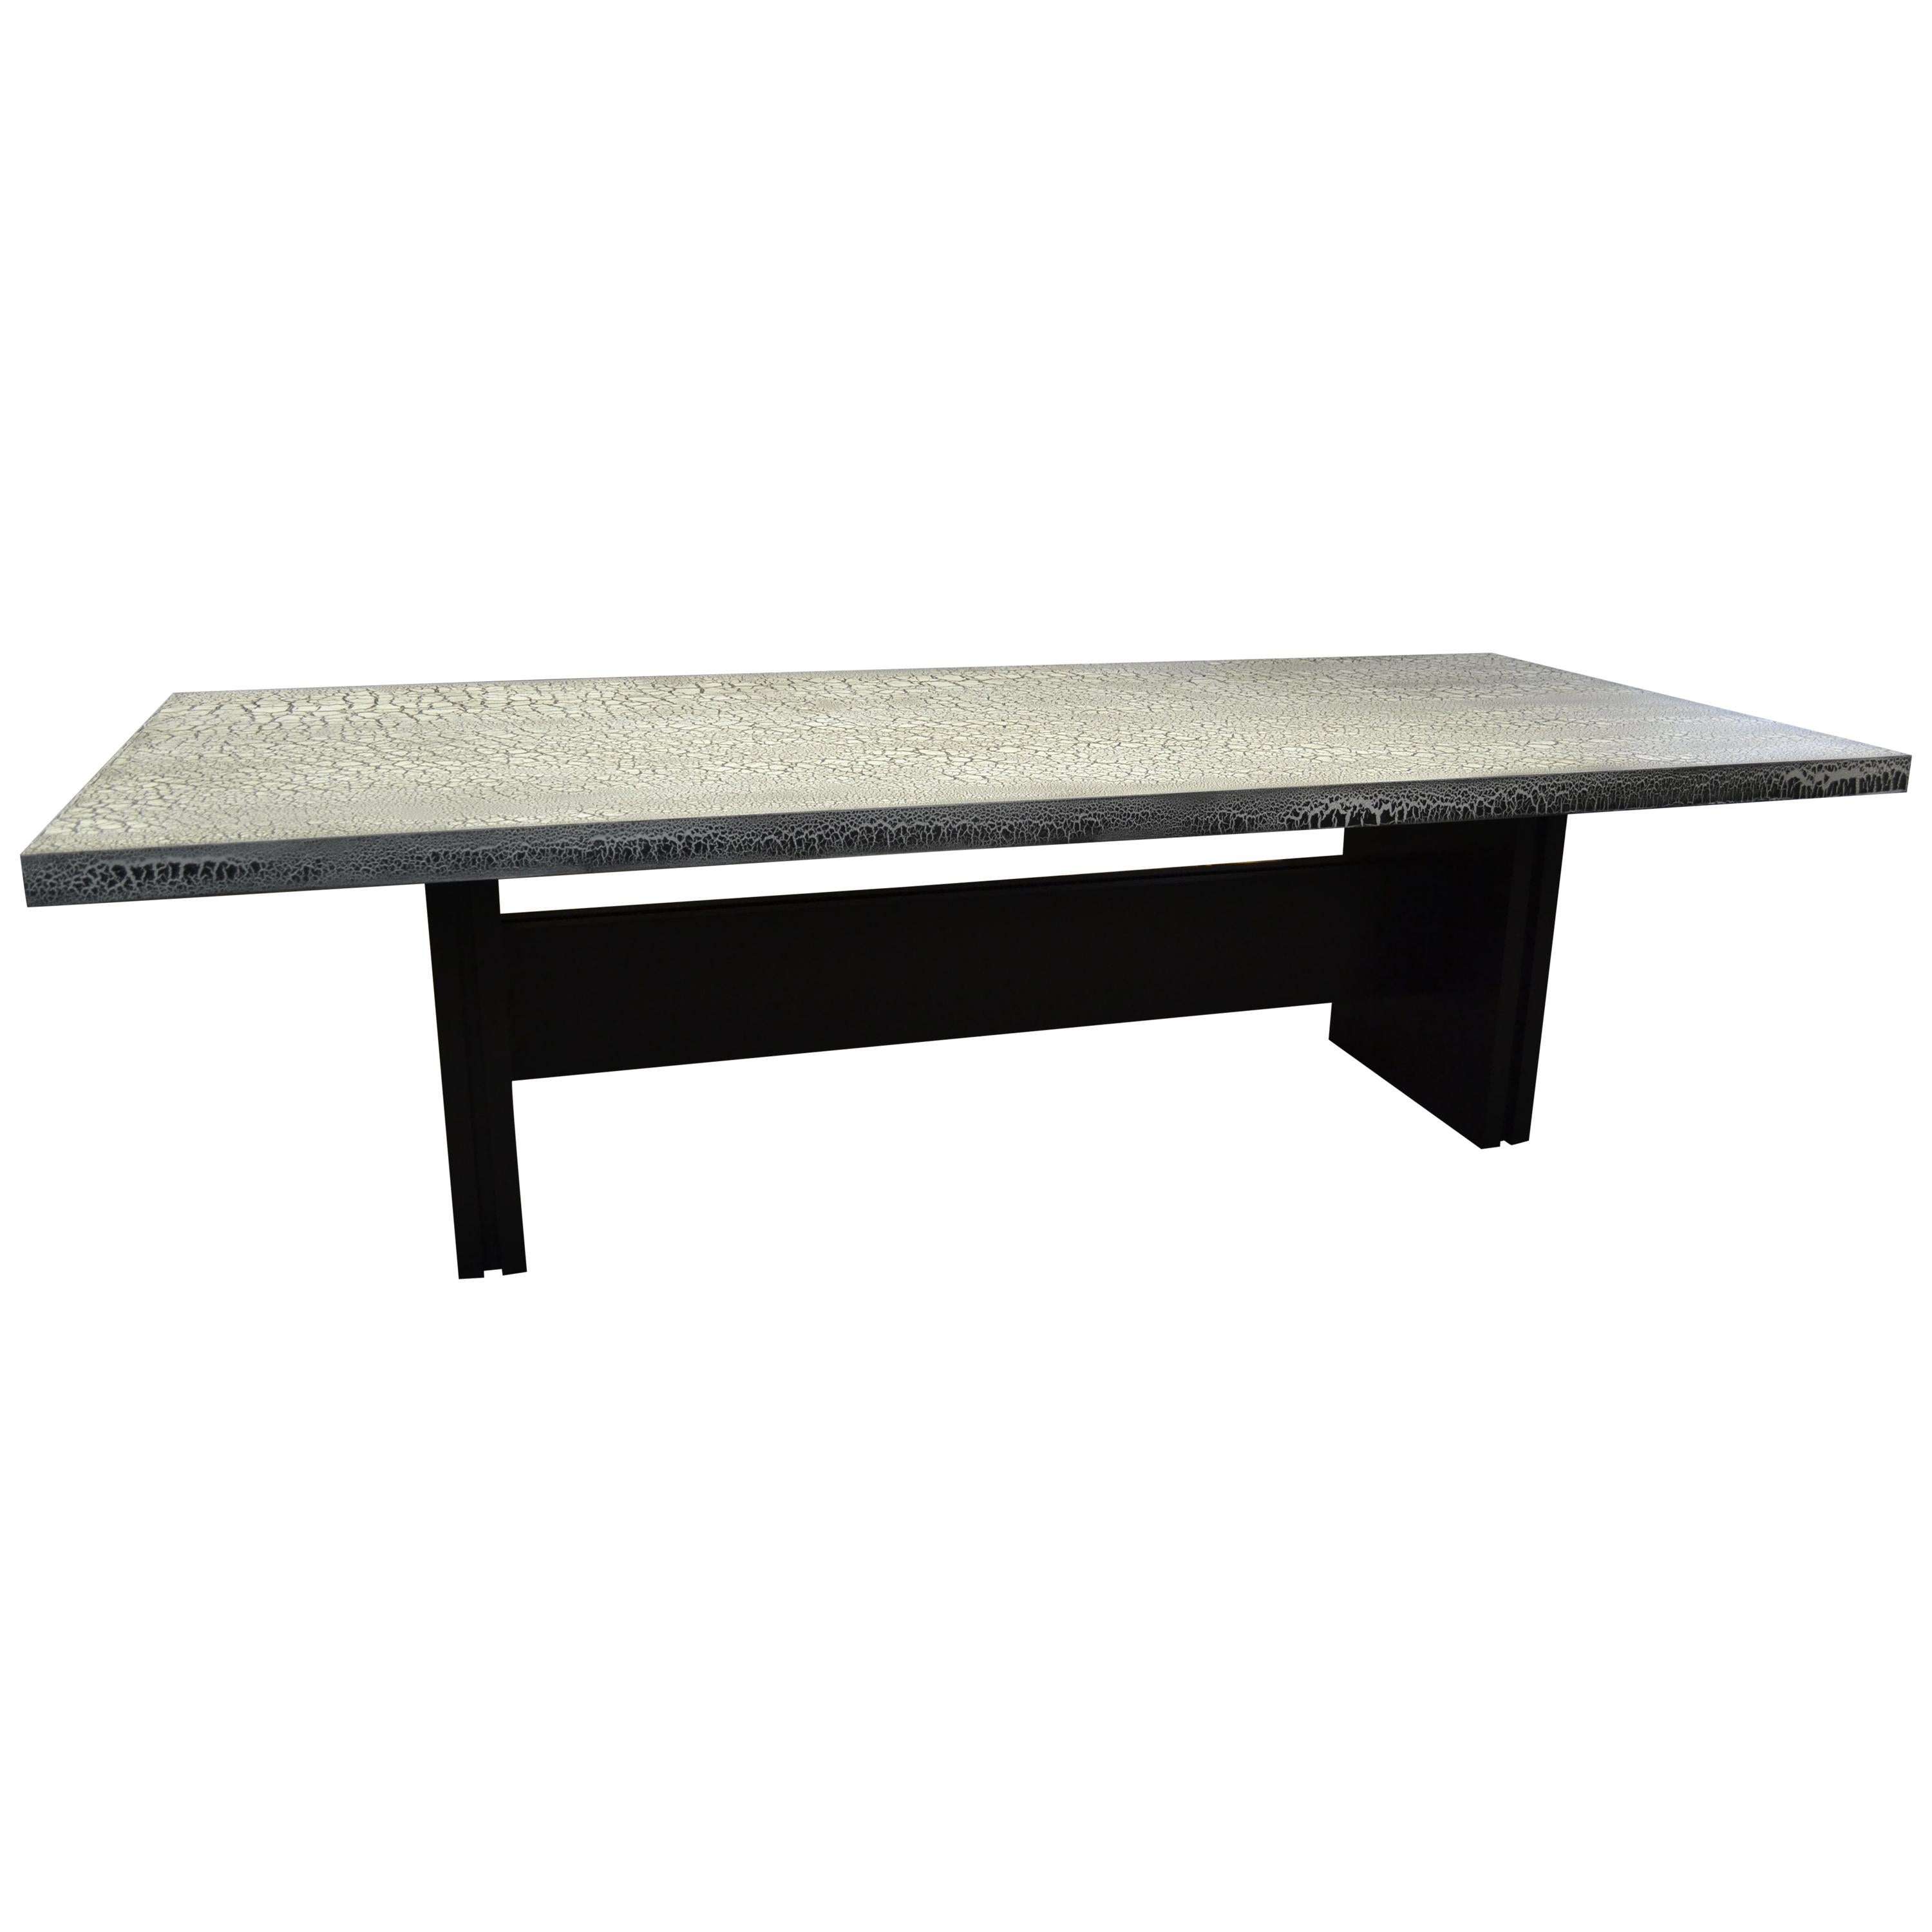 Mike Bell, Inc. Krackle Table For Sale